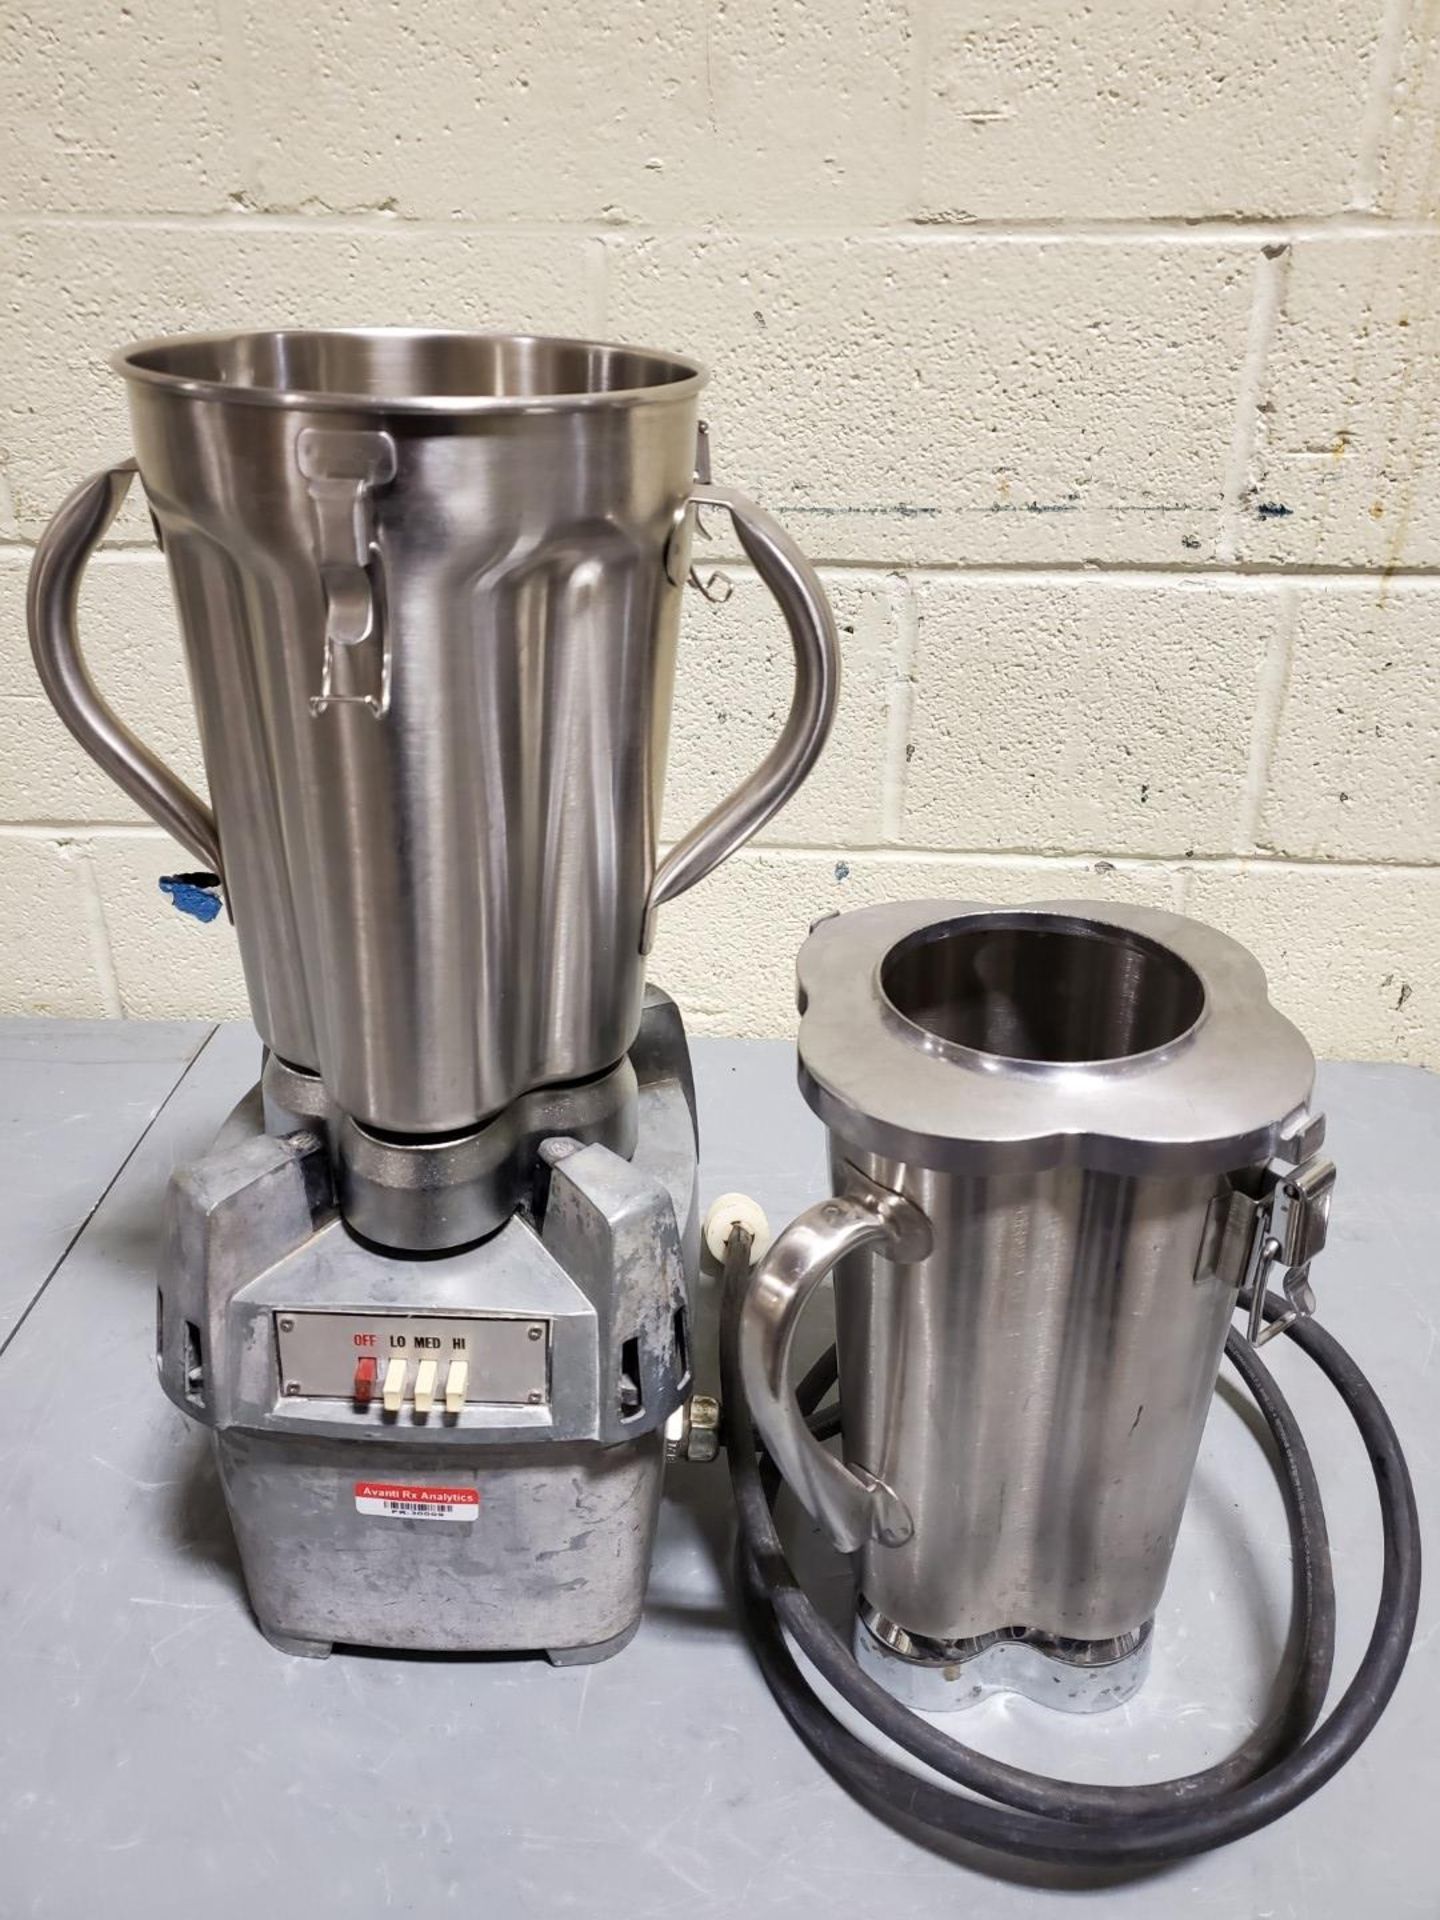 Waring Commercial Blender CB-6, model 91-215, (2) stainless steel pitchers with choppers, with speed